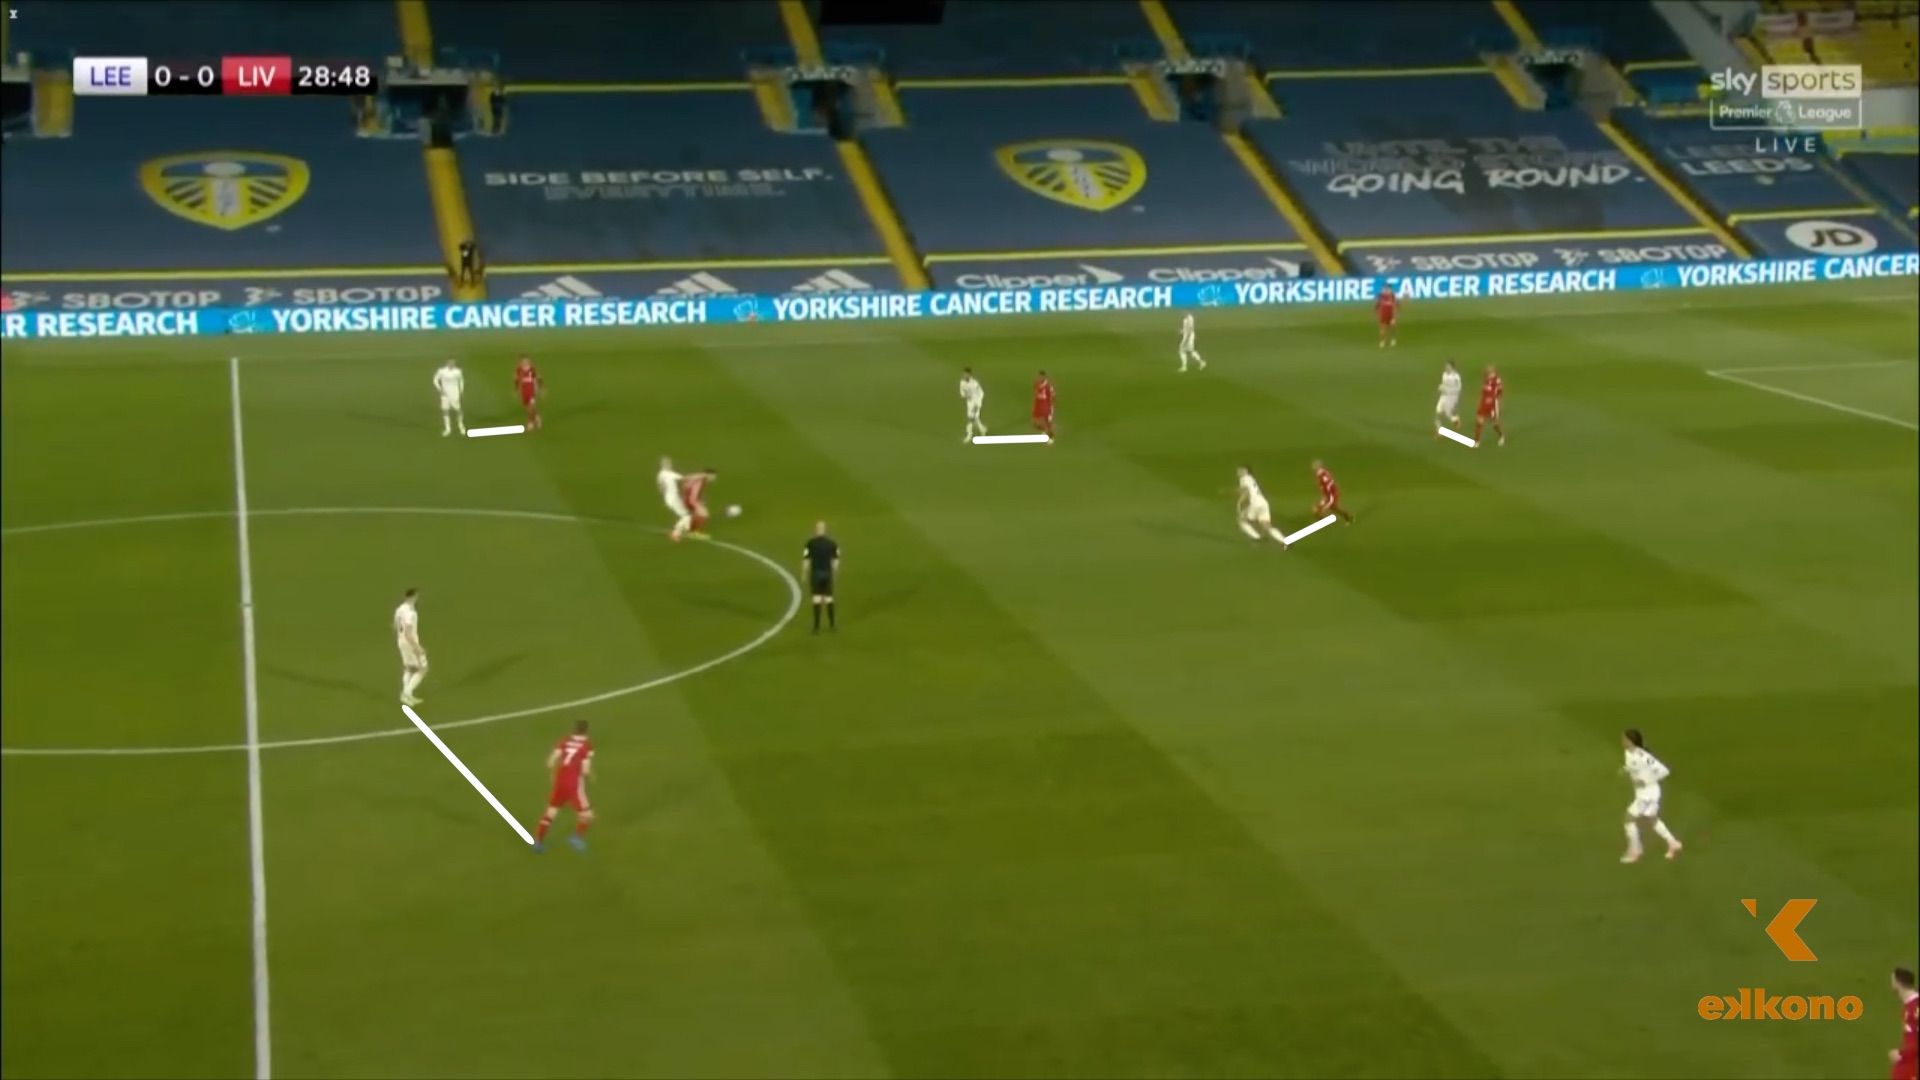 The most iconic part of Bielsa's philosophy is his man-marking across all the pitch. 'El Loco' assigns individual marking to his players, who must follow their opponent